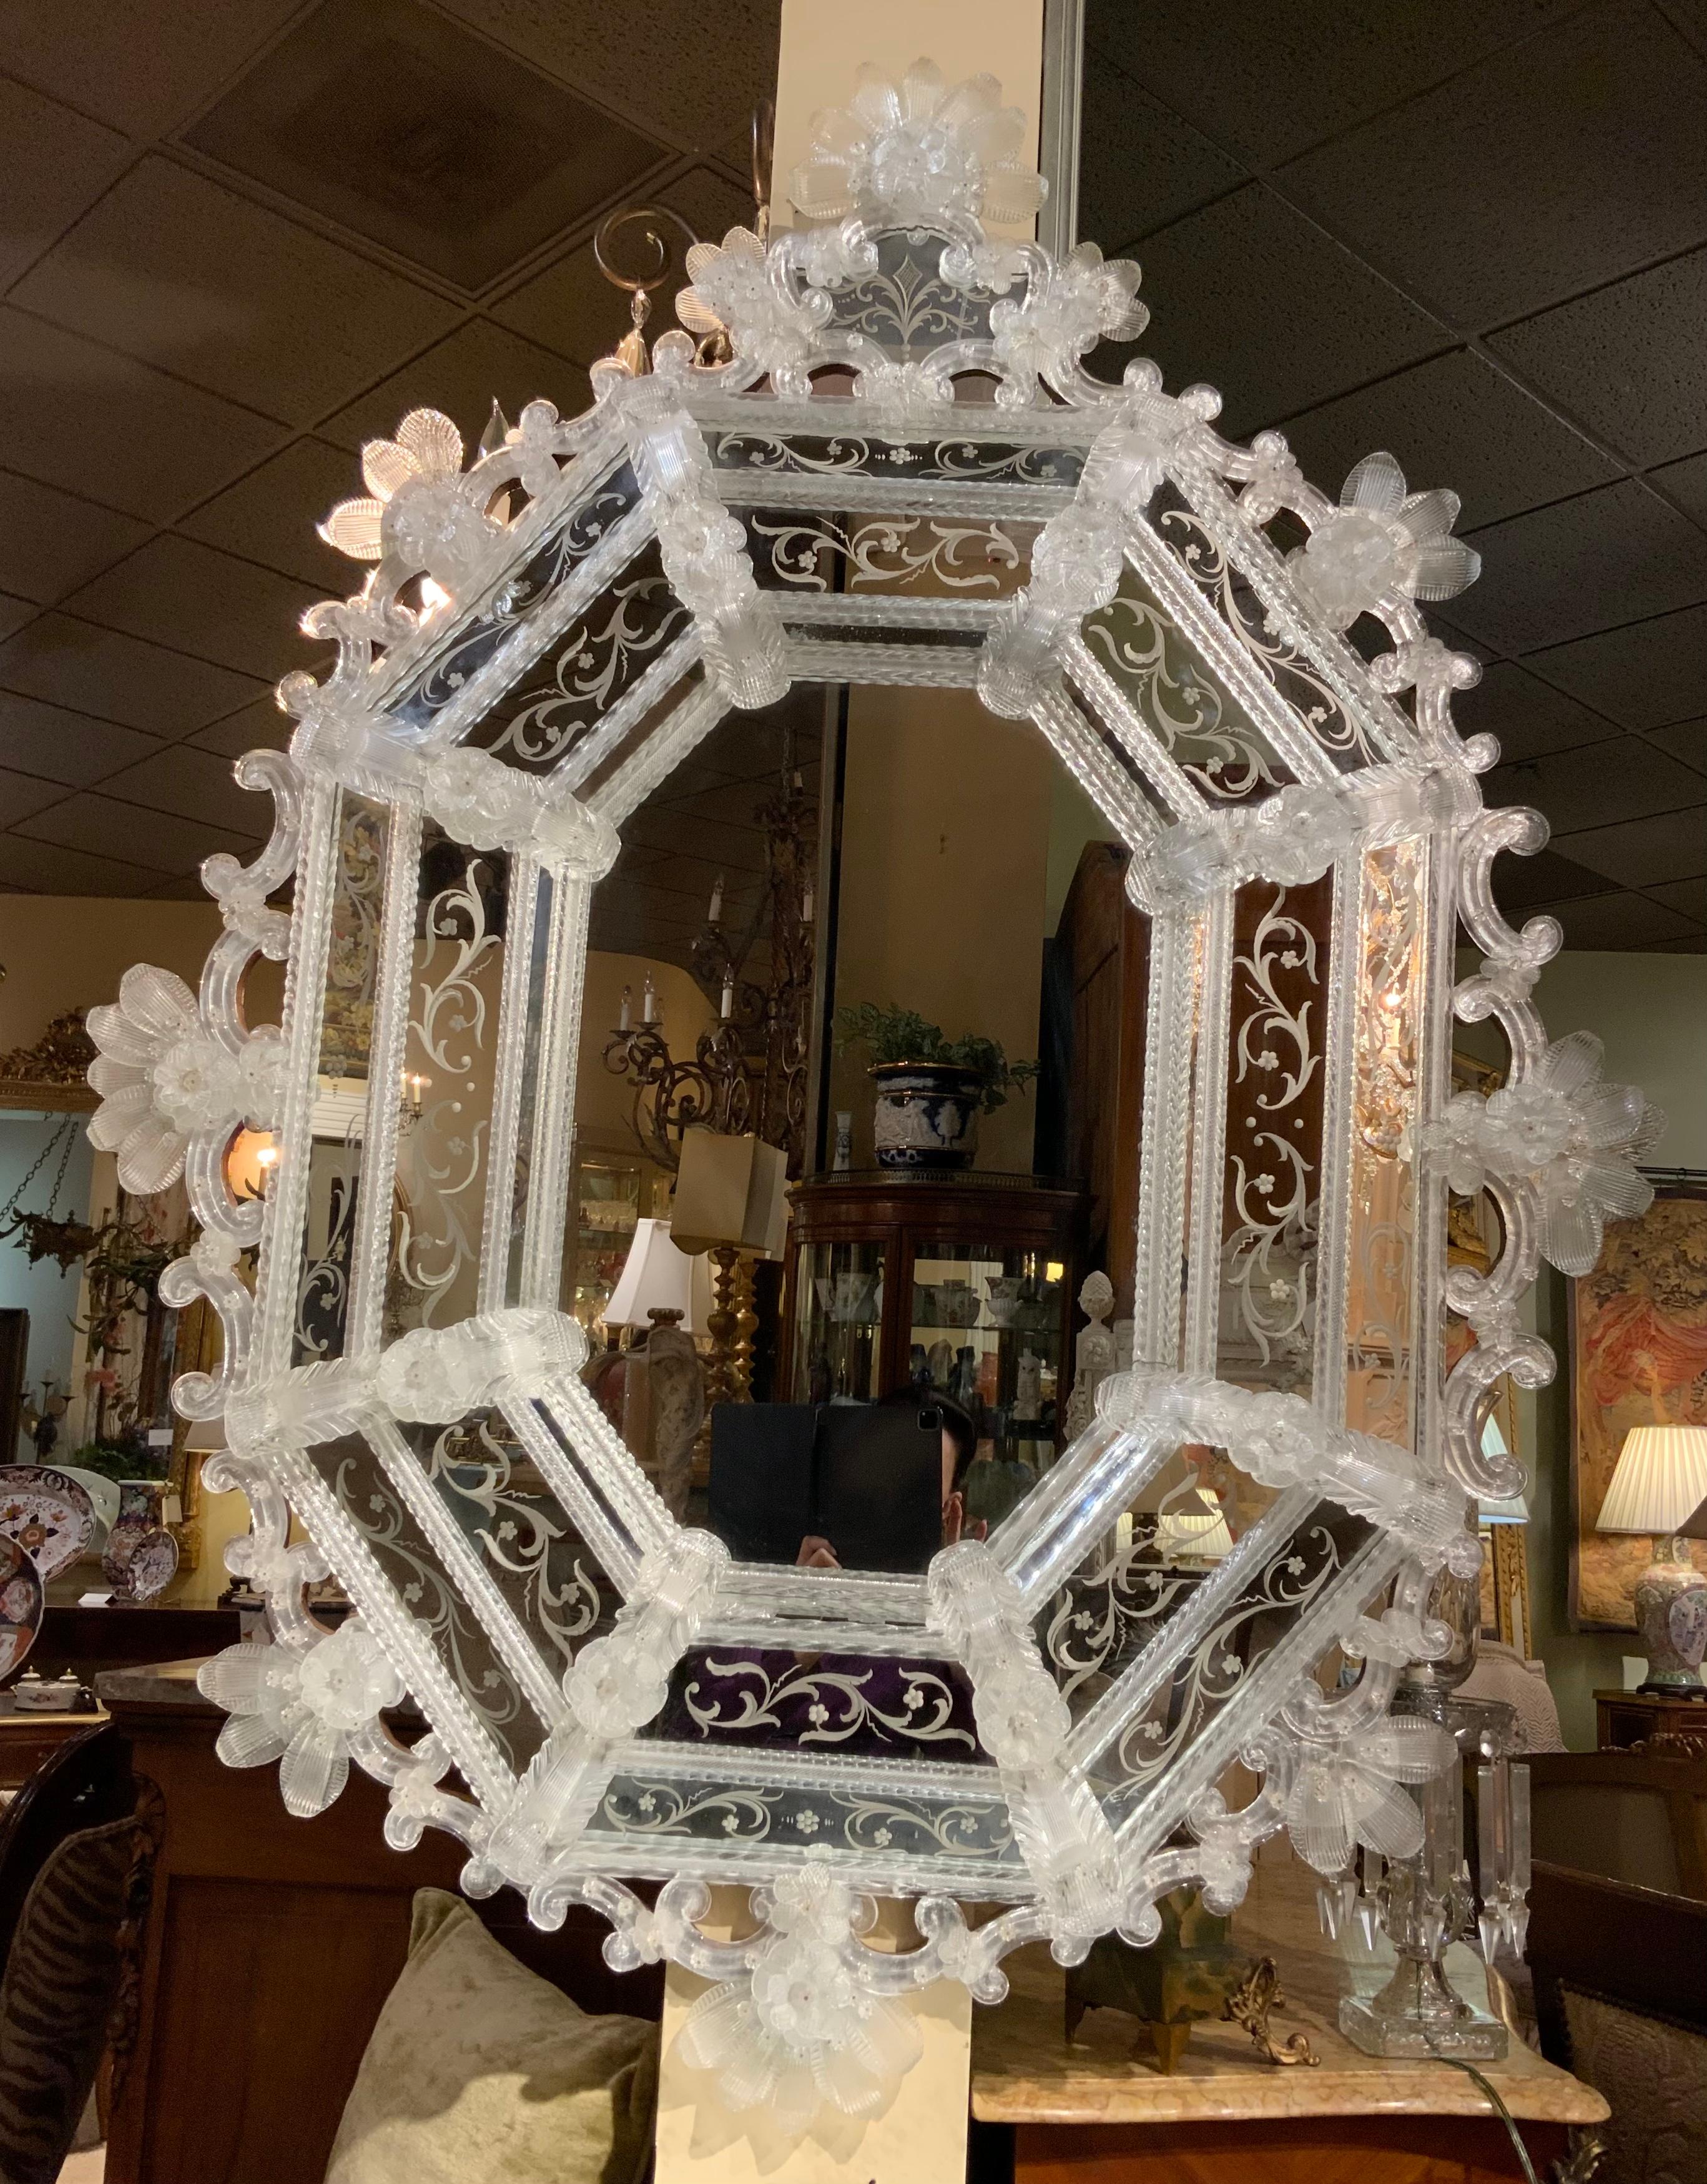 Large impressive and decorative mirror with multiple blown
Glass flowers and foliate elements that are surrounding
This mirror. All parts are in tact and without chips or missing
Pieces. Decorative etching adds beauty and interest to